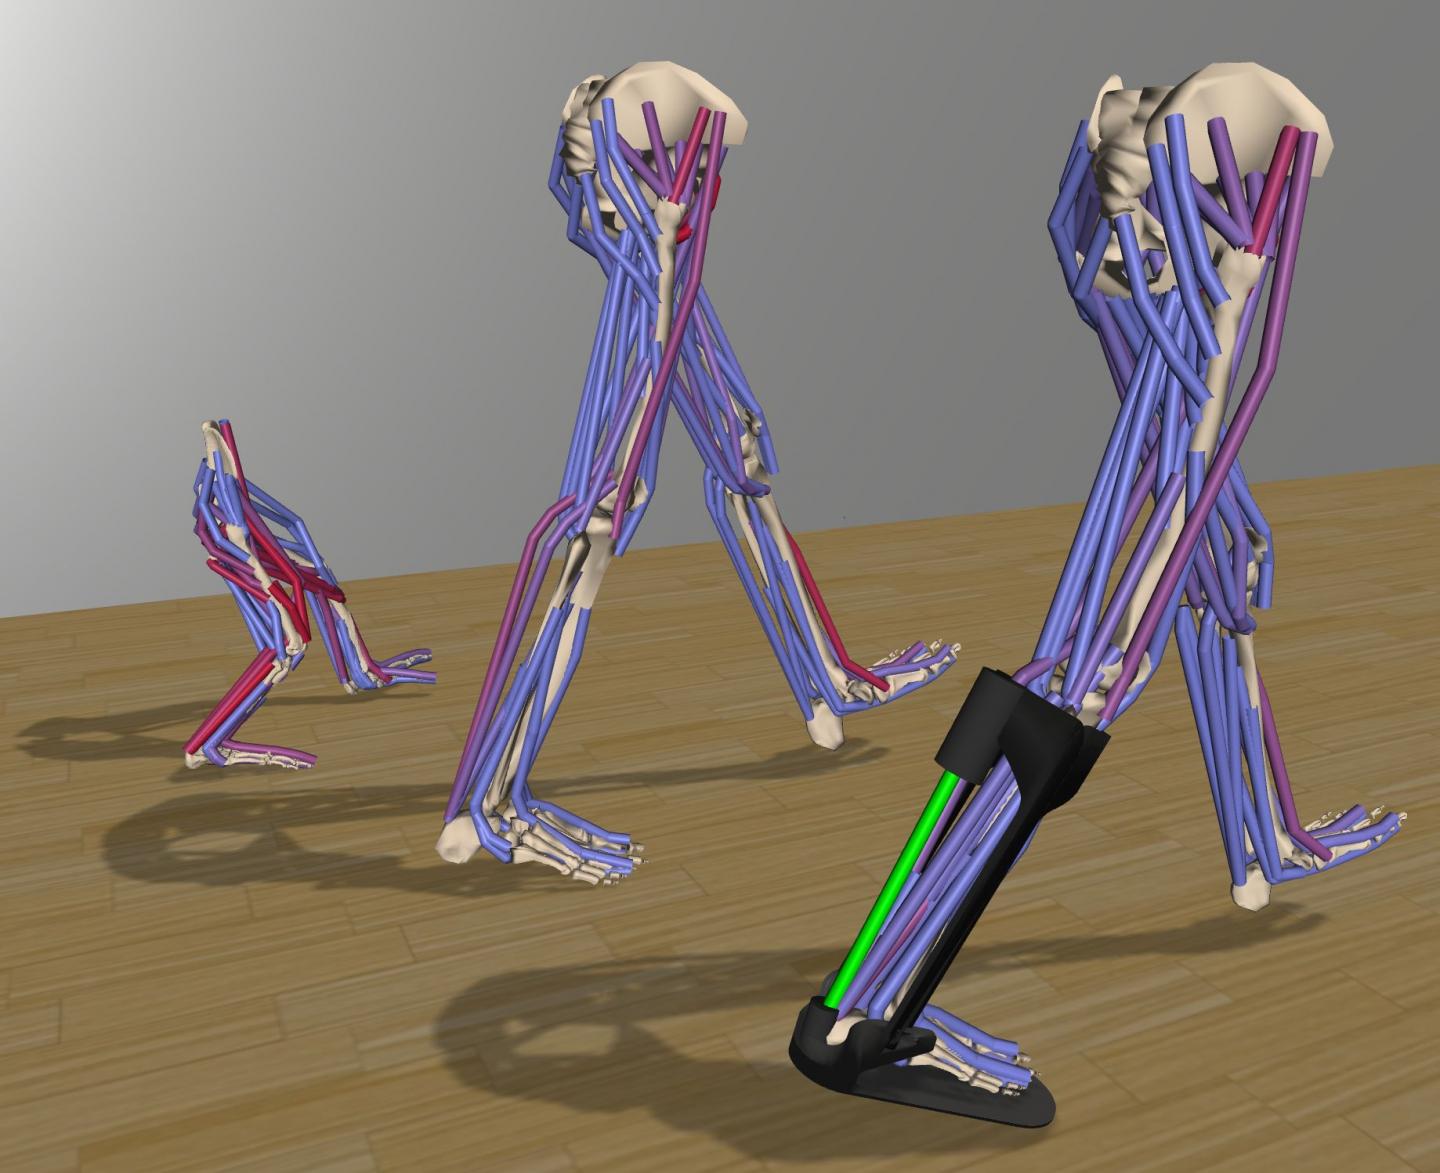 Simulation Software Recreates Complex Movements For Medical, Rehabilitation, and Basic Science